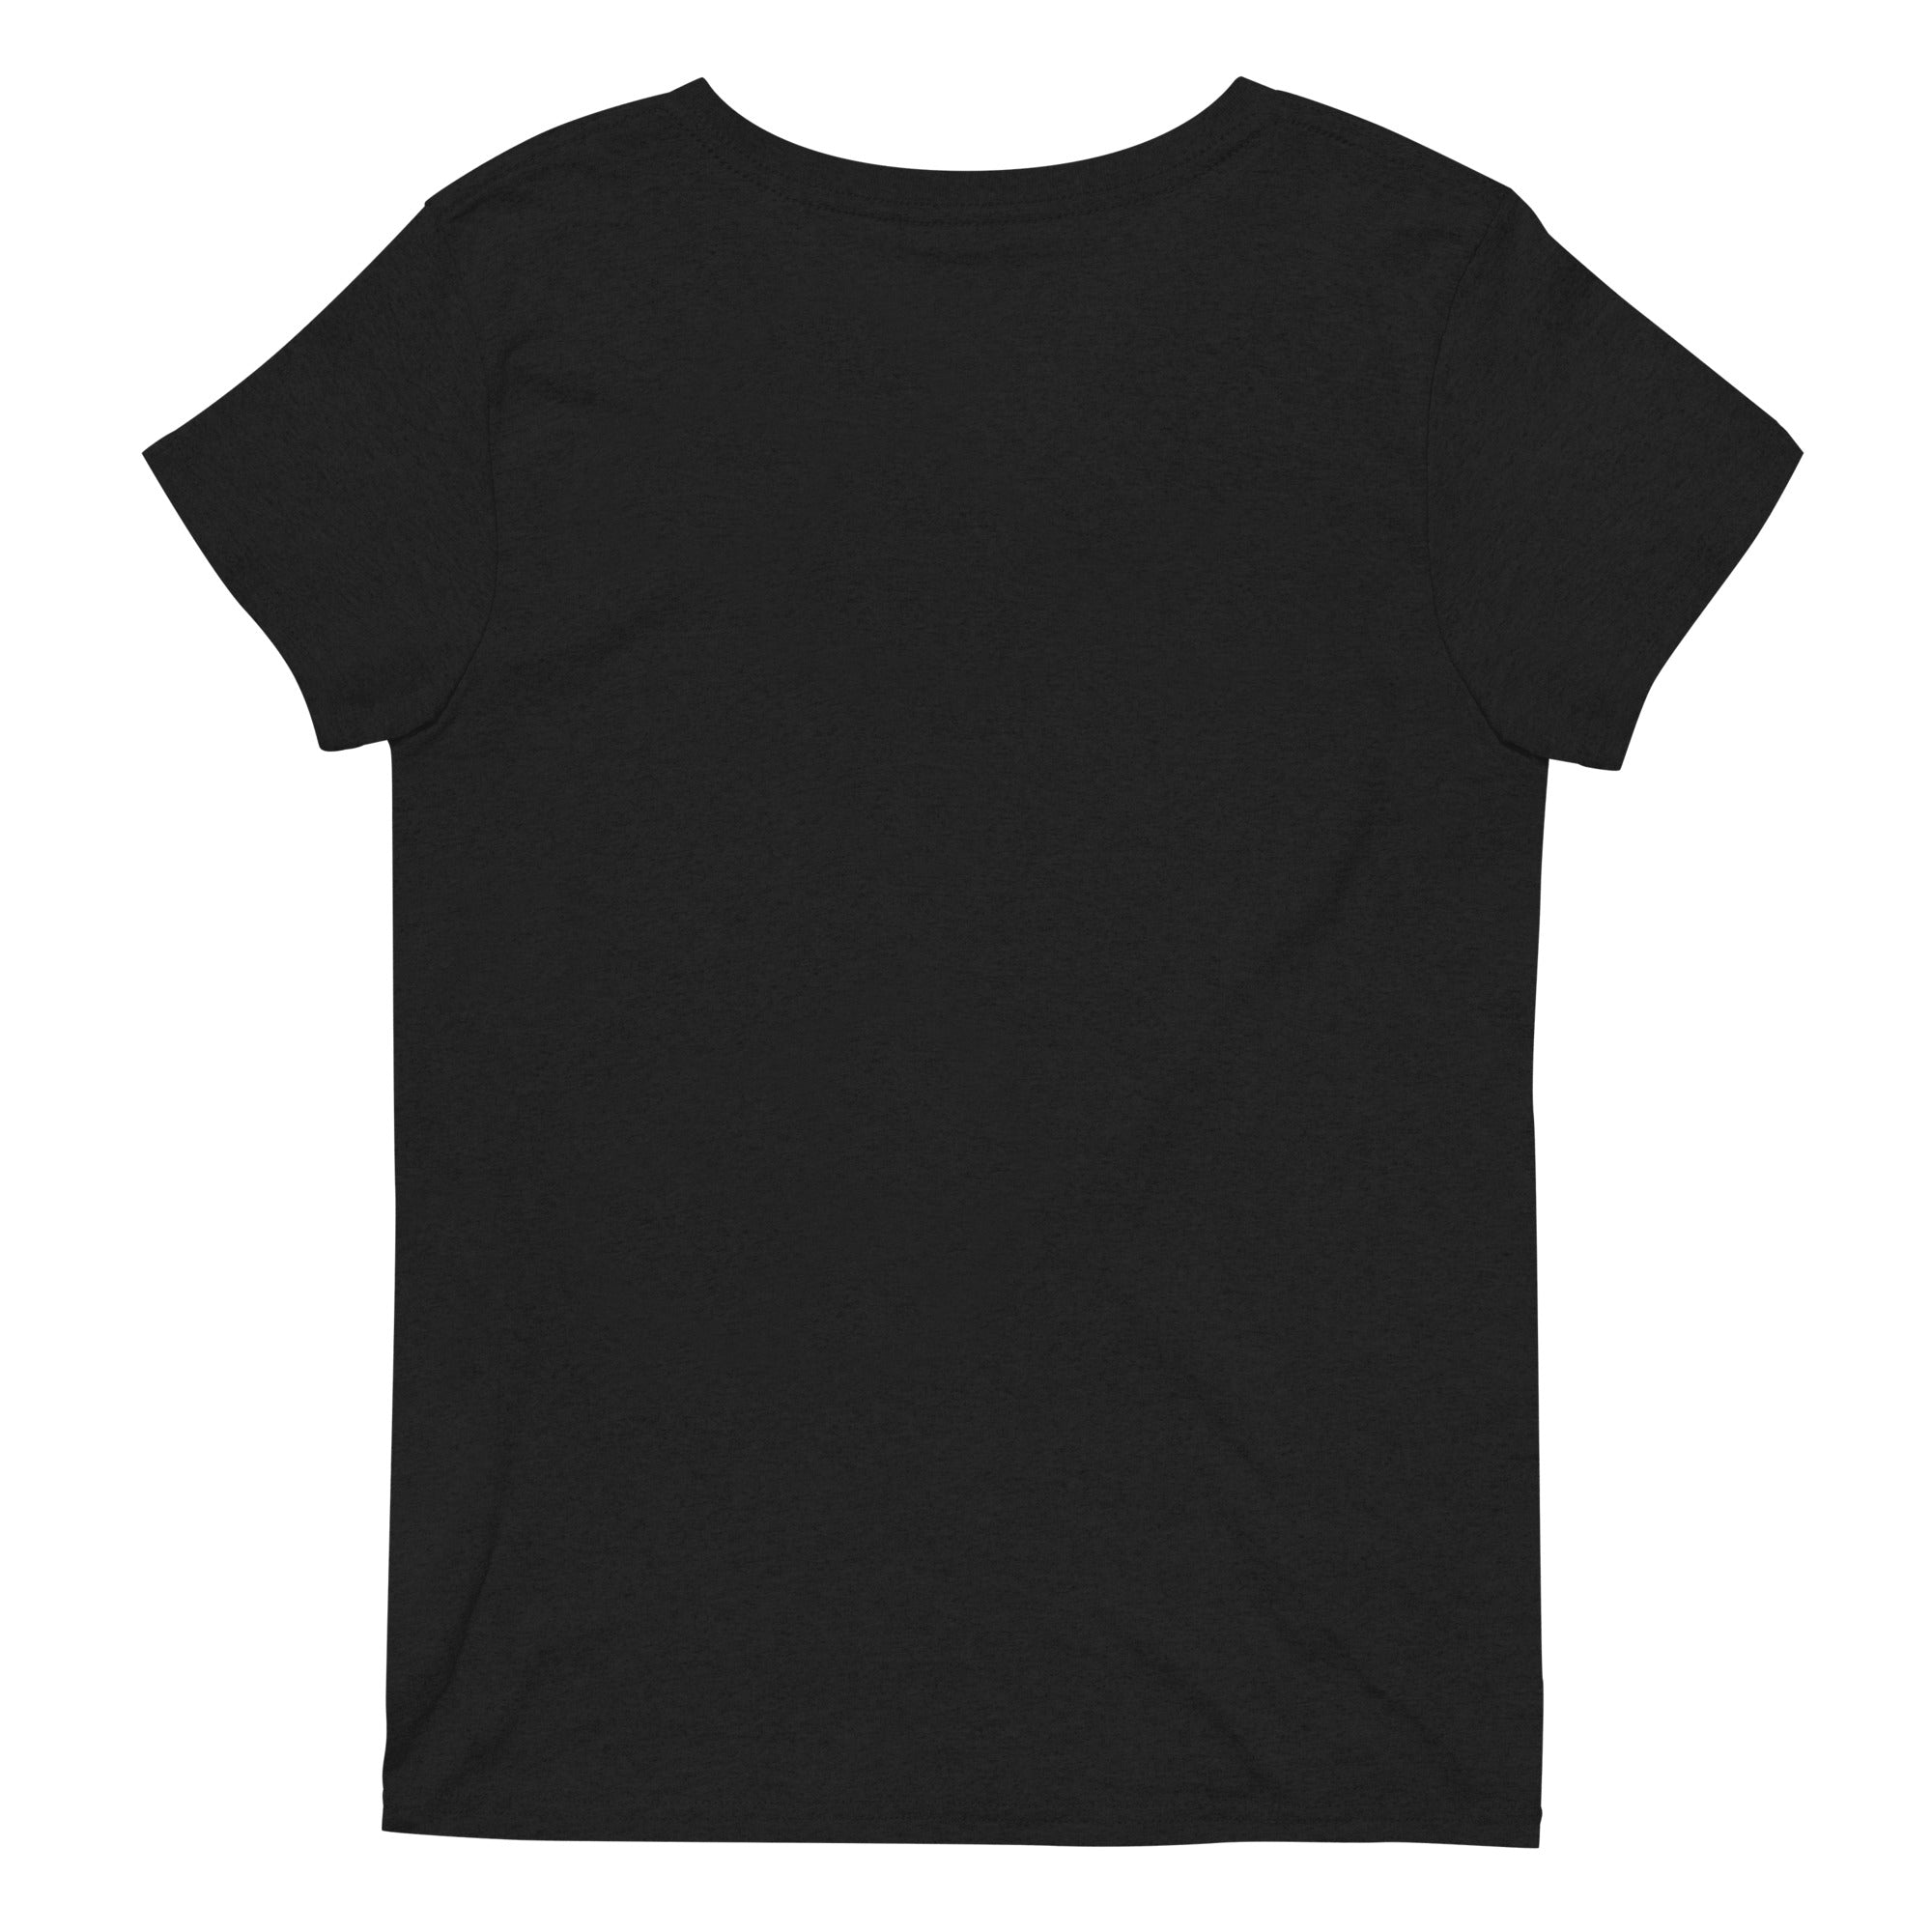 2023: Best Year Yet - Women’s recycled v-neck t-shirt